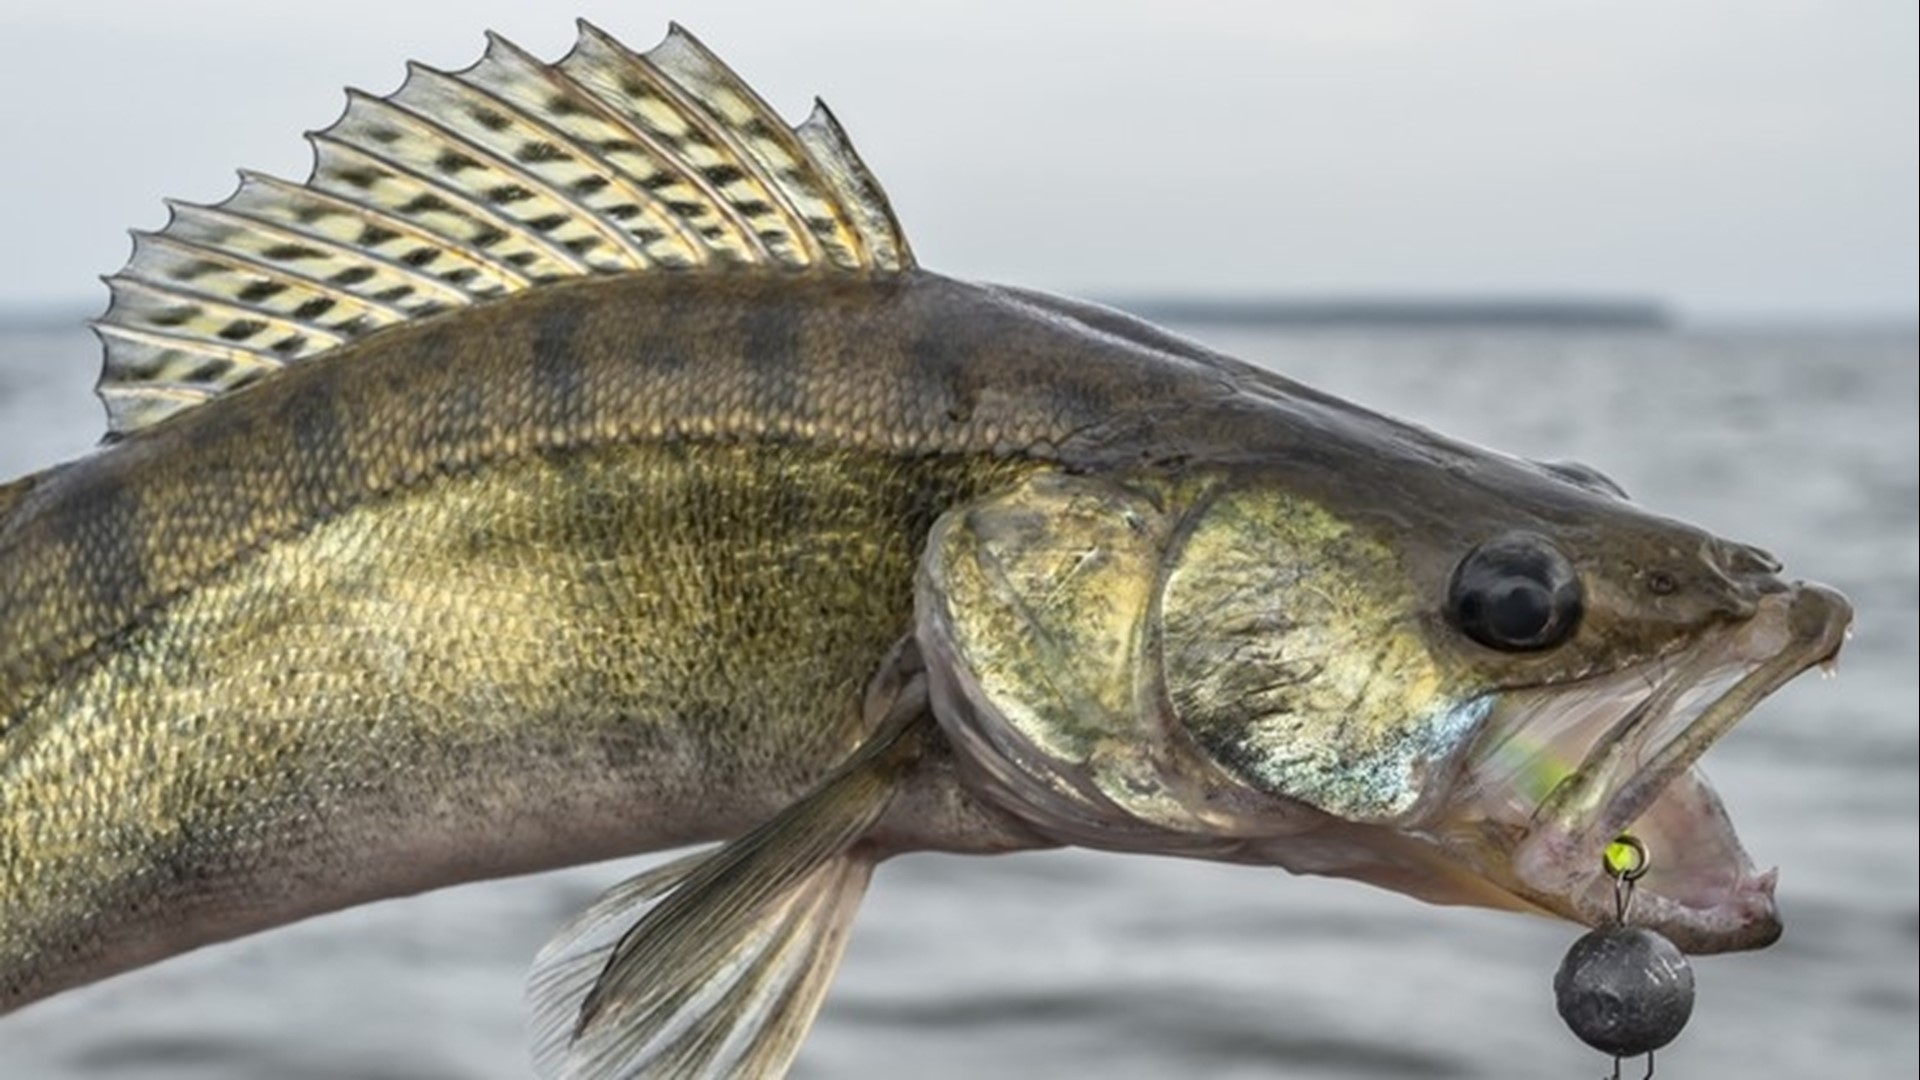 The current six-fish limit has been in place in Minnesota since 1966.